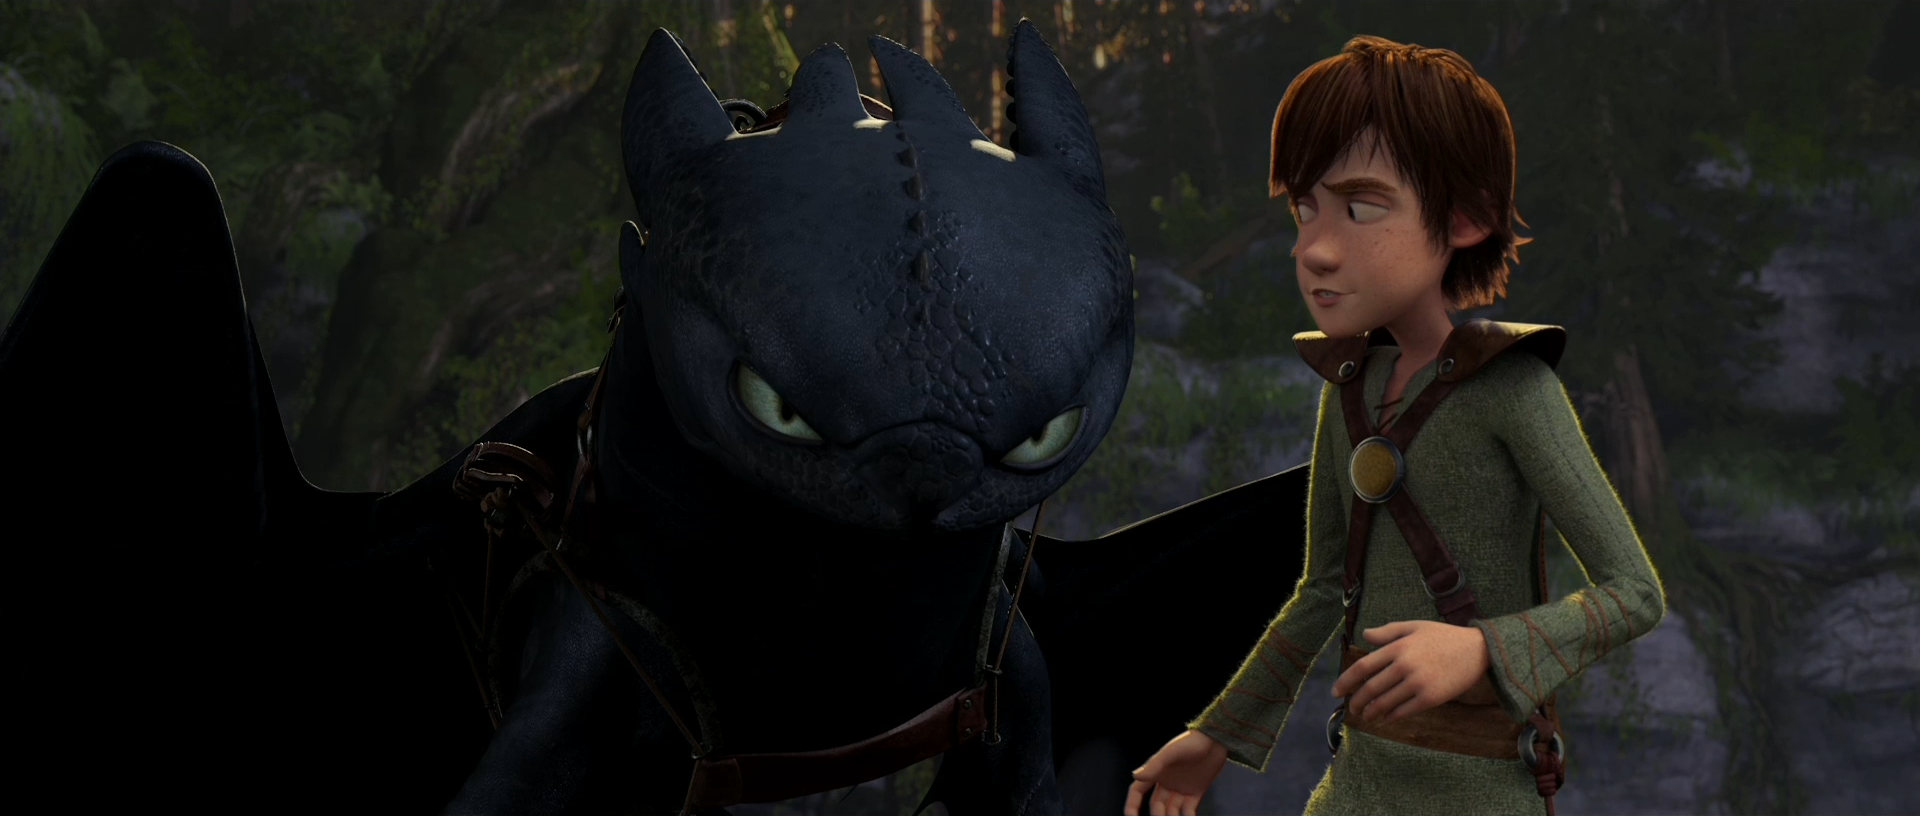 Hiccup And Toothless Wallpaper By